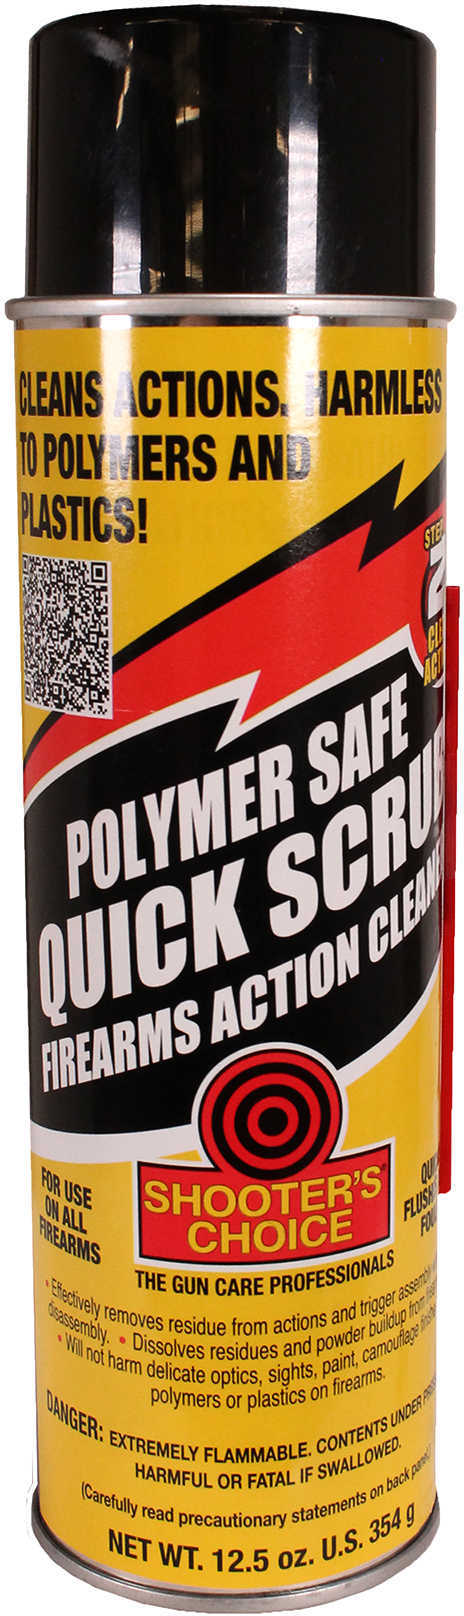 Shooters Choice Polymer Safe Degreaser 12.5 oz. Aerosol - Removes dirt grease powder fouling oil grime soft car PSQ12